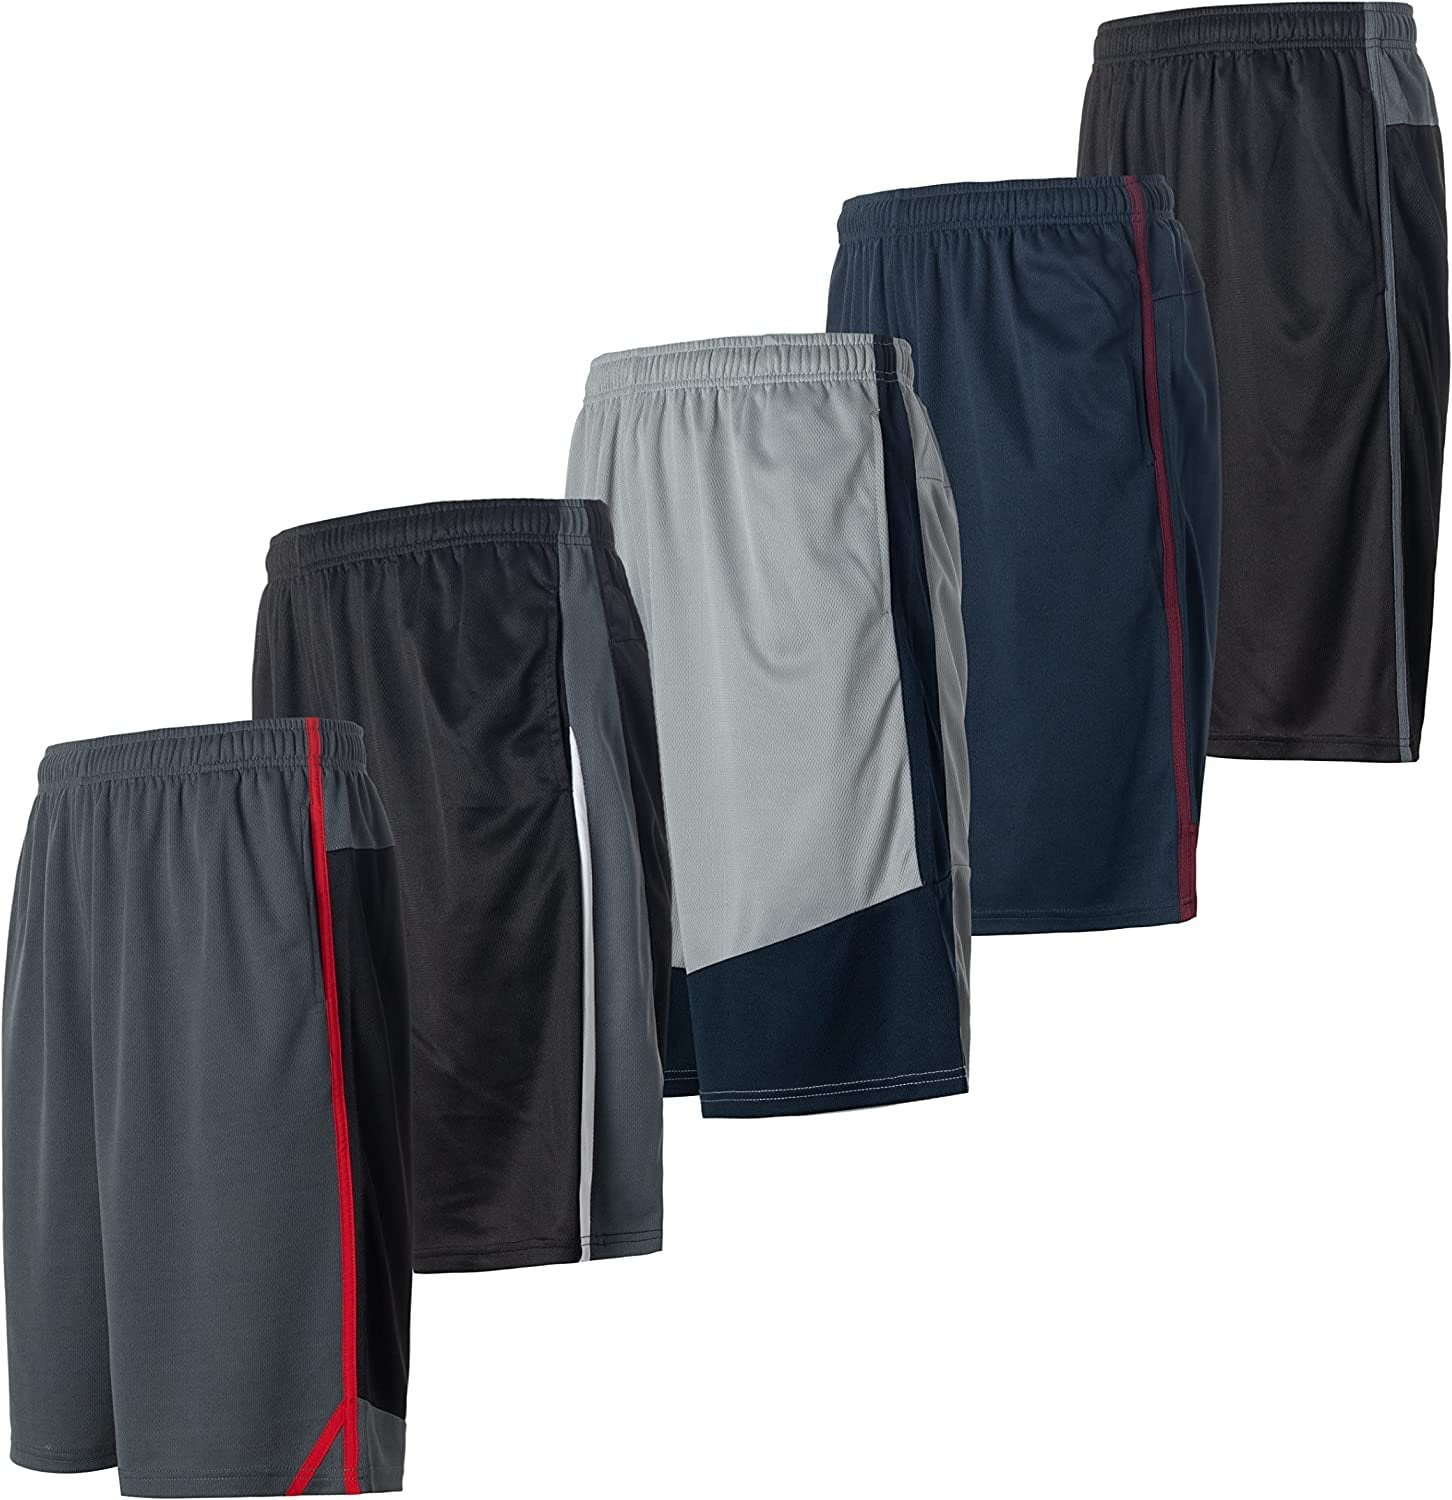 Athletic Shorts for Men - 5 Pack Pack Men's Activewear Quick Dry Basketball  Shorts - Workout, Gym, Running